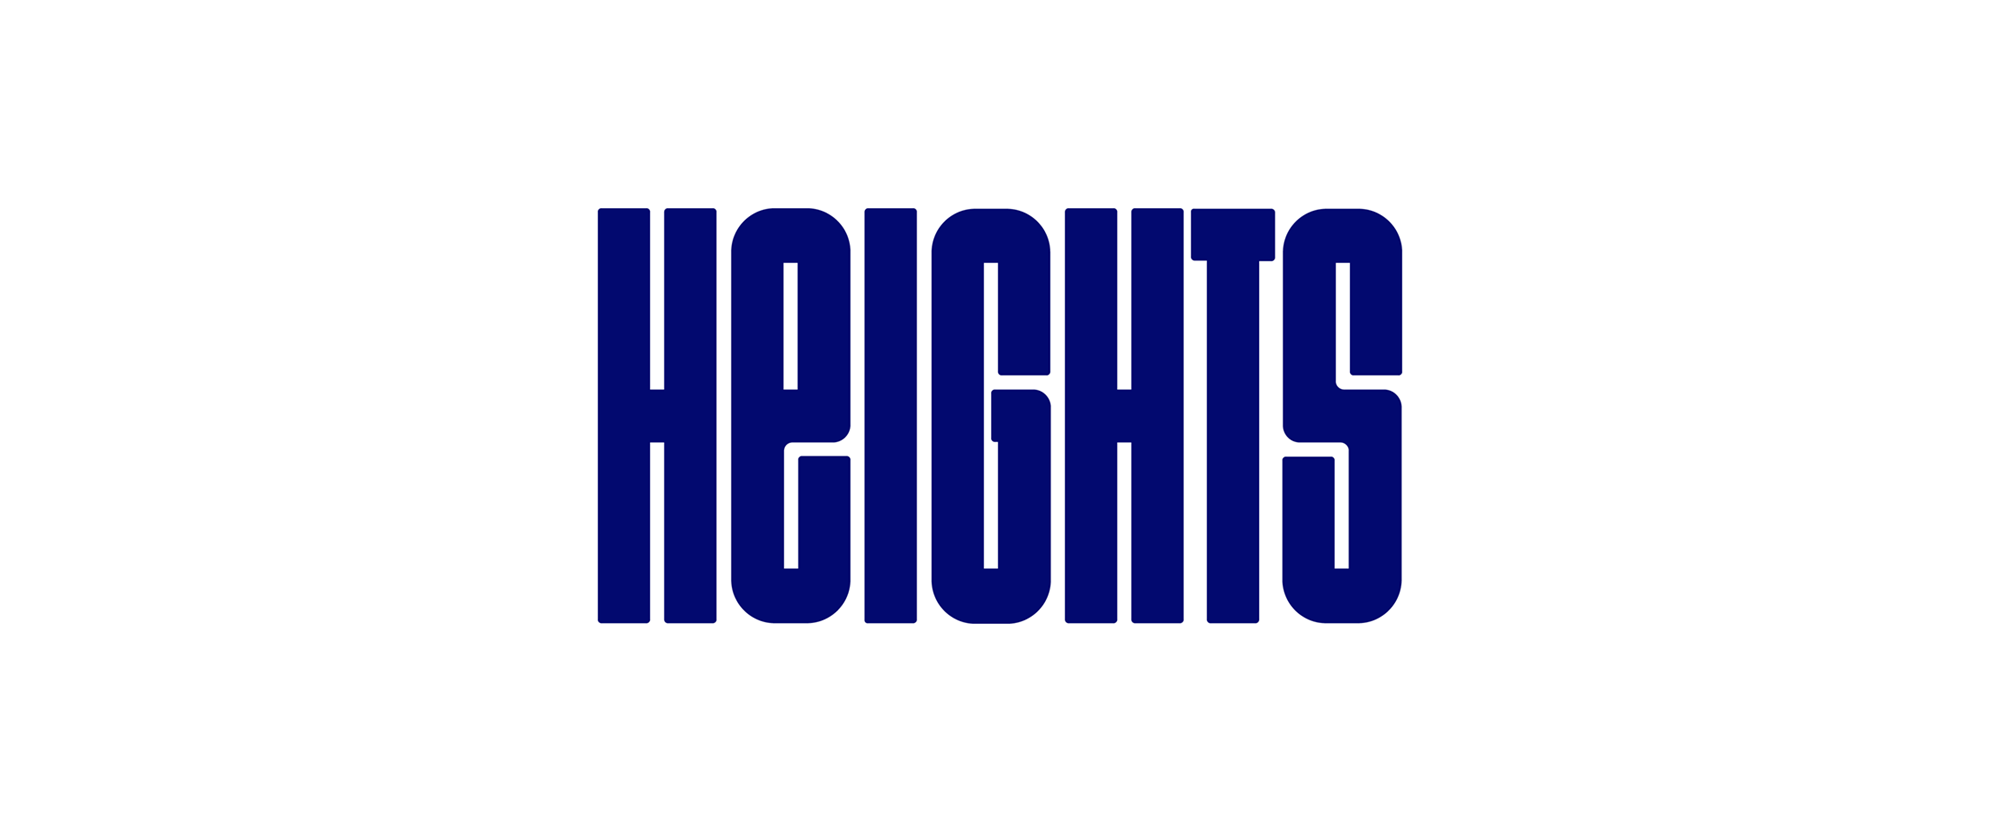 Brand New: New Logo and Identity for Heights by Ragged Edge